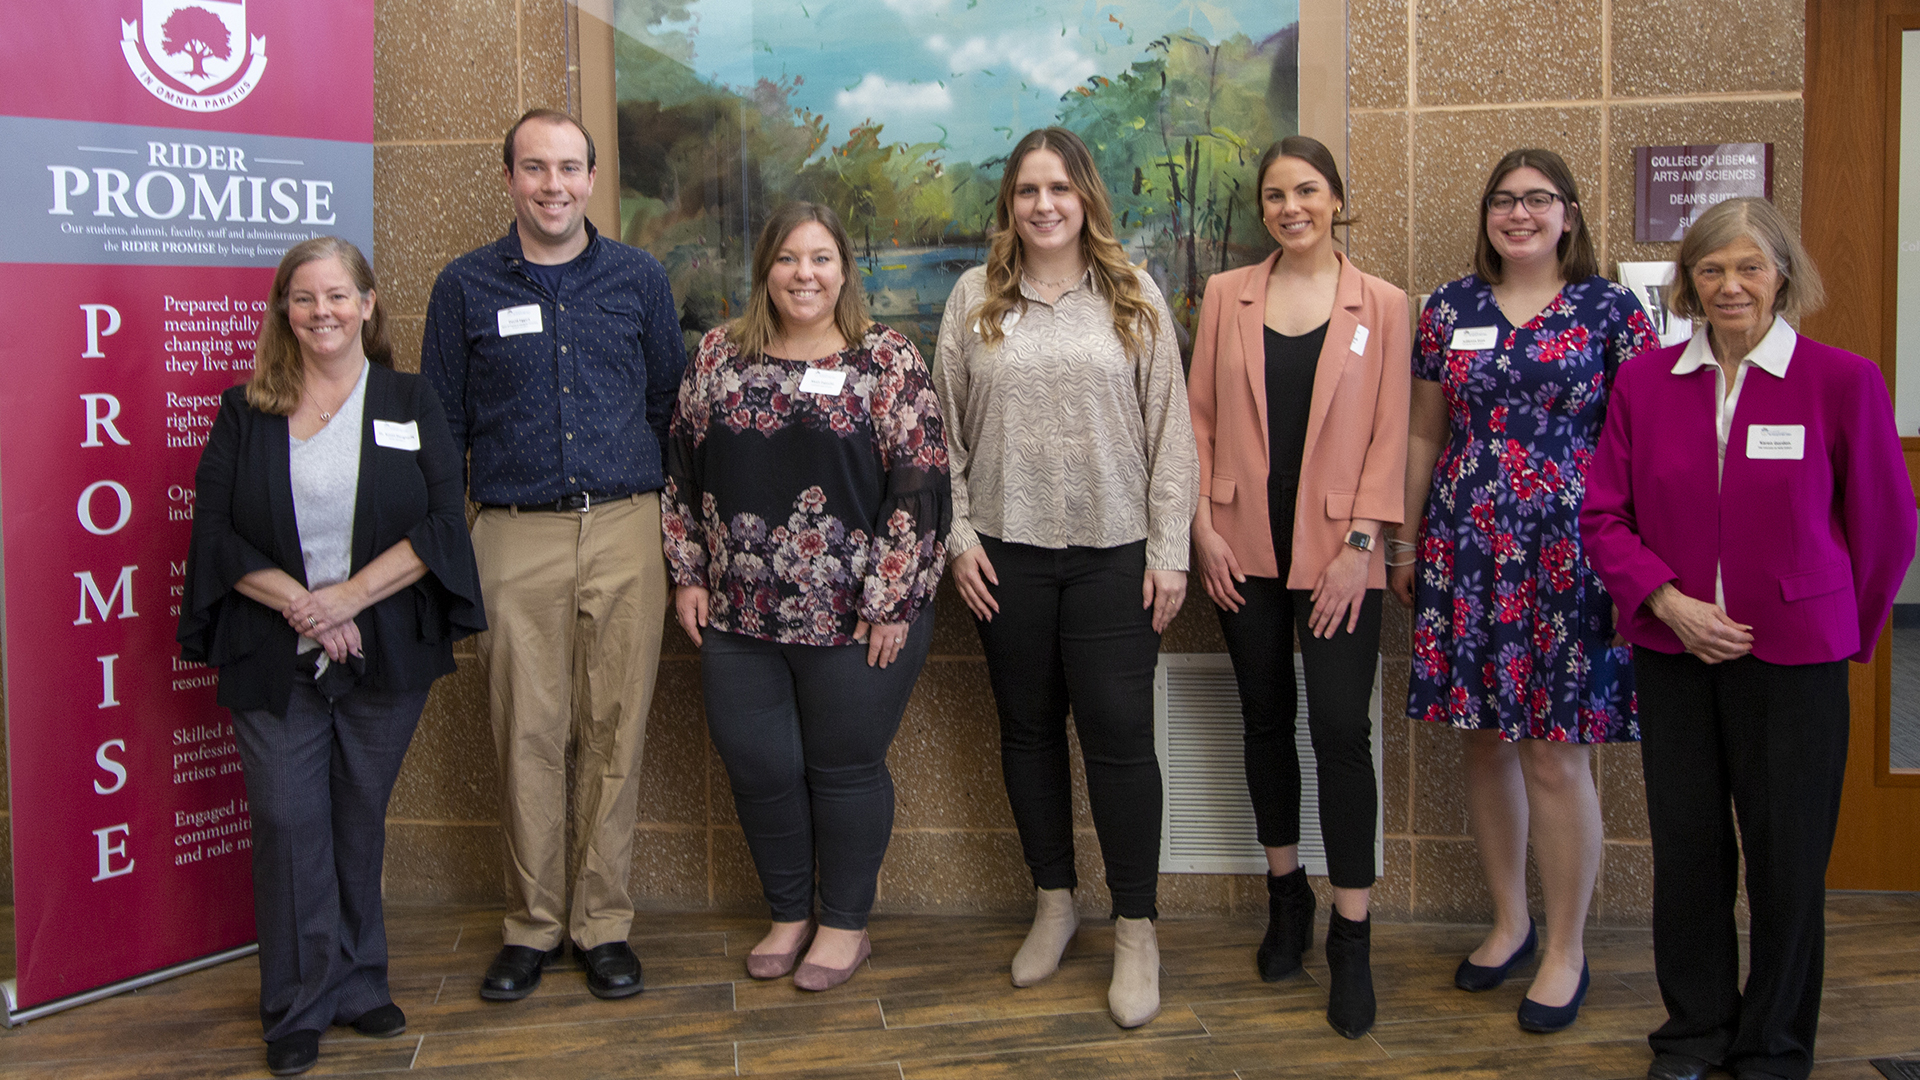 On March 16, Rider University hosted about 120 high school students from across the state as part of the New Jersey Future Educators Association’s (NJFEA) Winter Conference